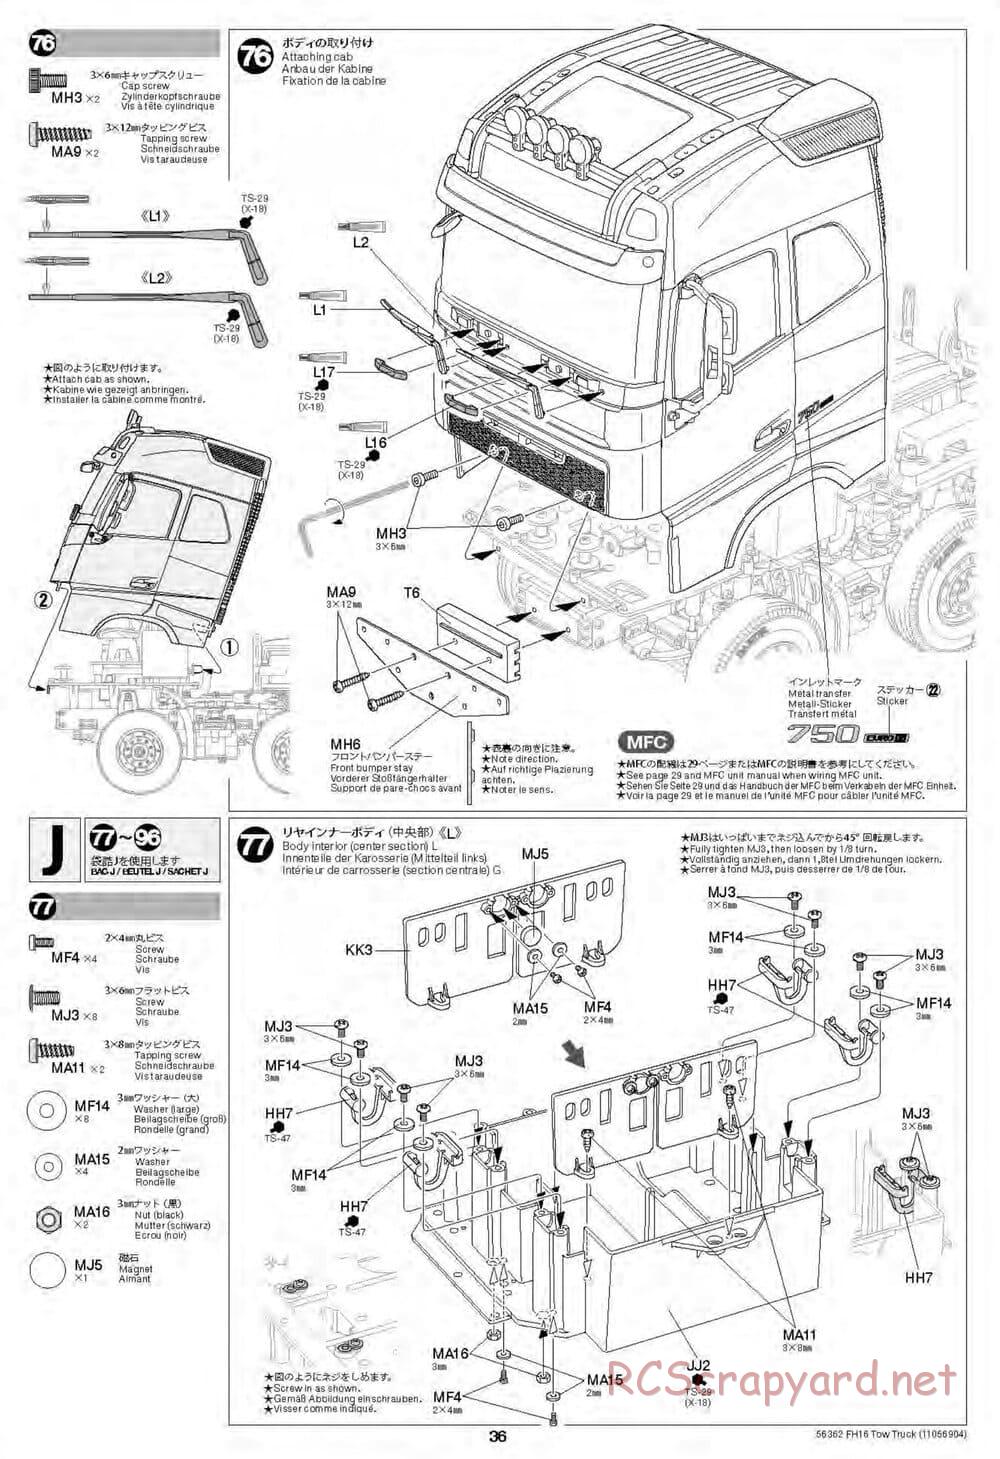 Tamiya - Volvo FH16 Globetrotter 750 8x4 Tow Truck - Manual - Page 36